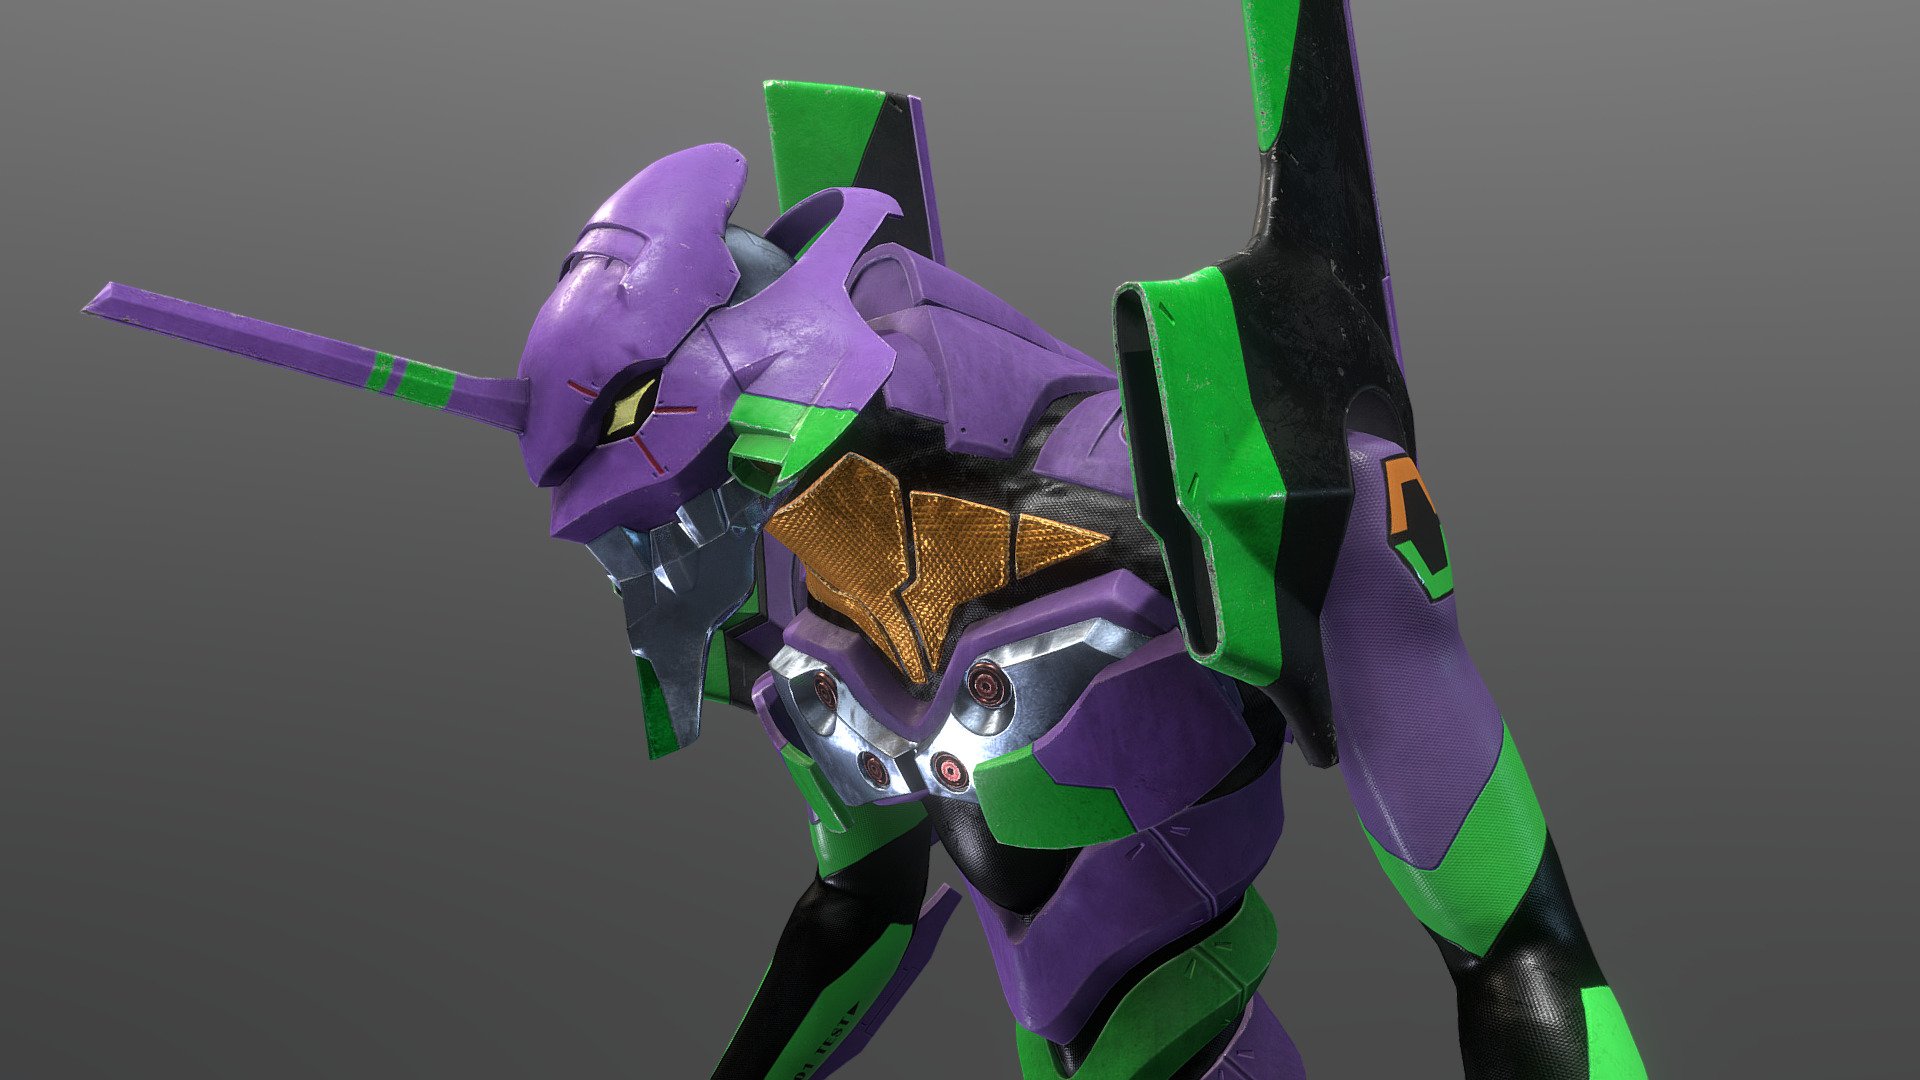 EVA 01 3D model. 
Model is not rigged. 
Files included: Blender and fbx + all the textures.

Possed example: https://sketchfab.com/3d-models/eva-01-1ef660db7bcc481d8700892e8a8a022d
Artstation model: https://www.artstation.com/artwork/6bxgOw

I'm open for comission work or freelance 3d model